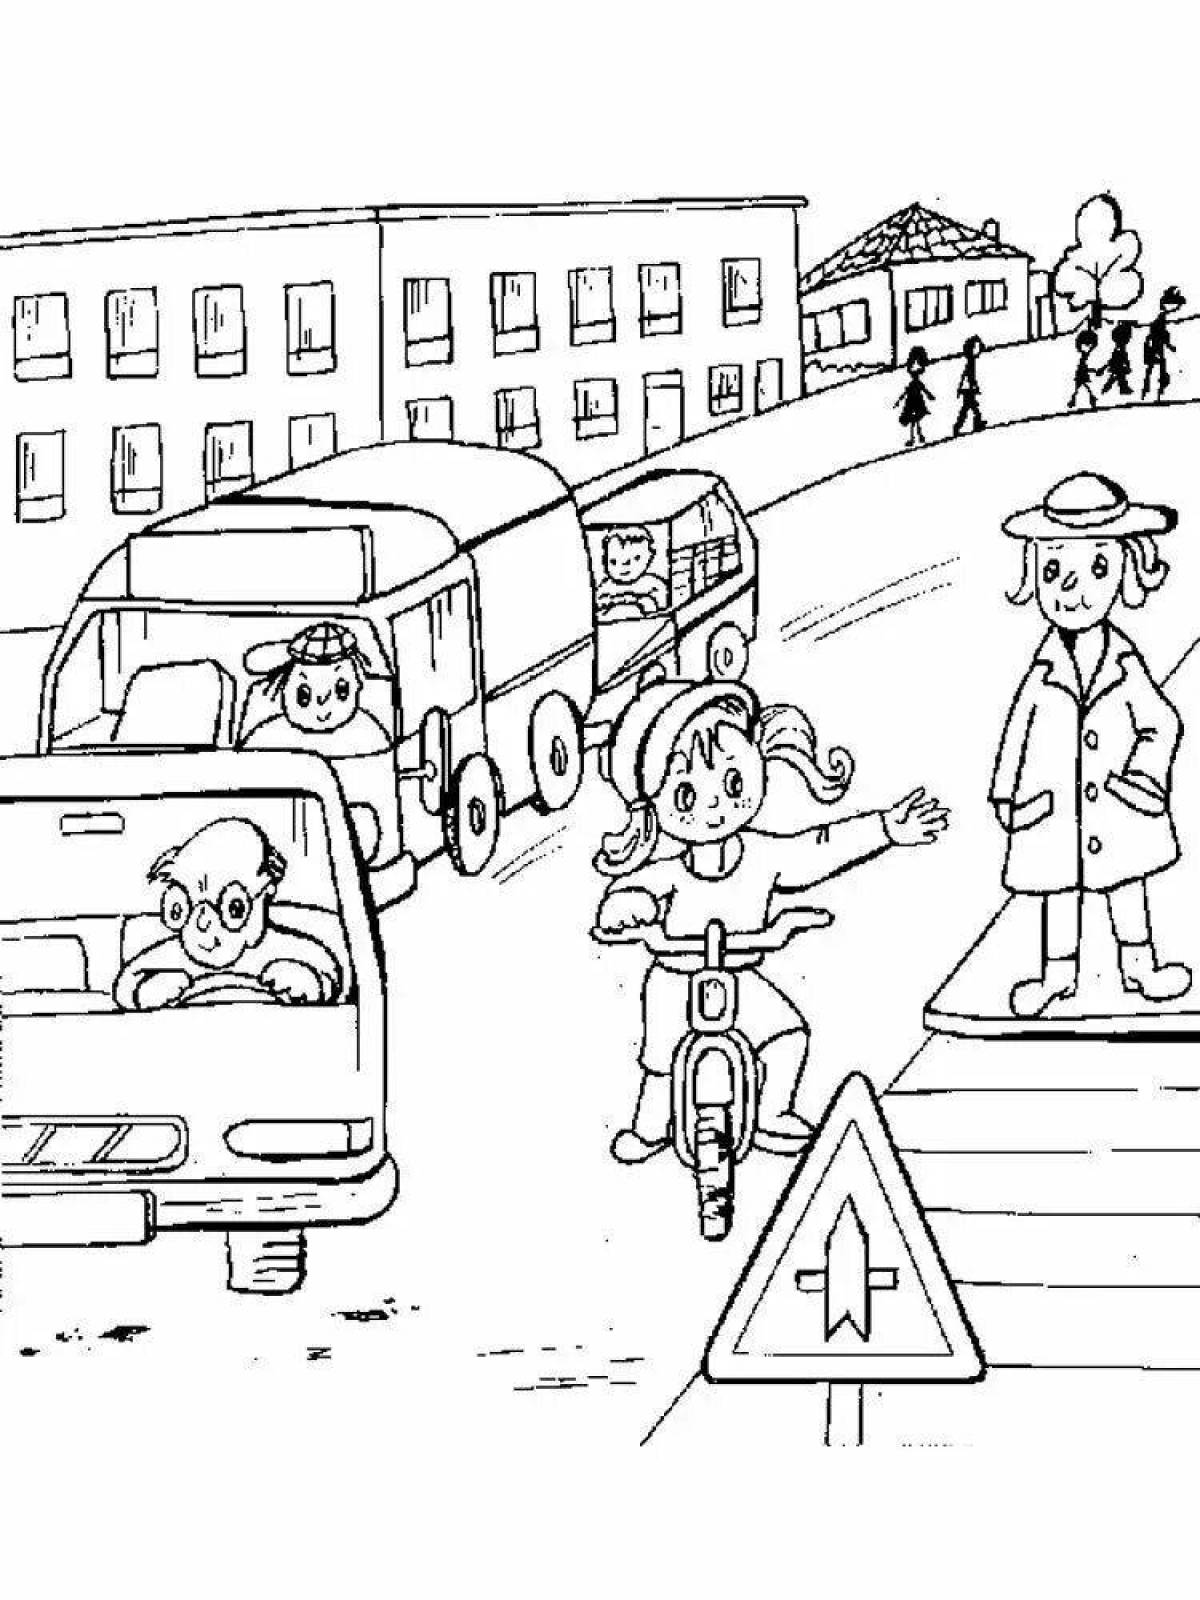 Playful pedestrian coloring page